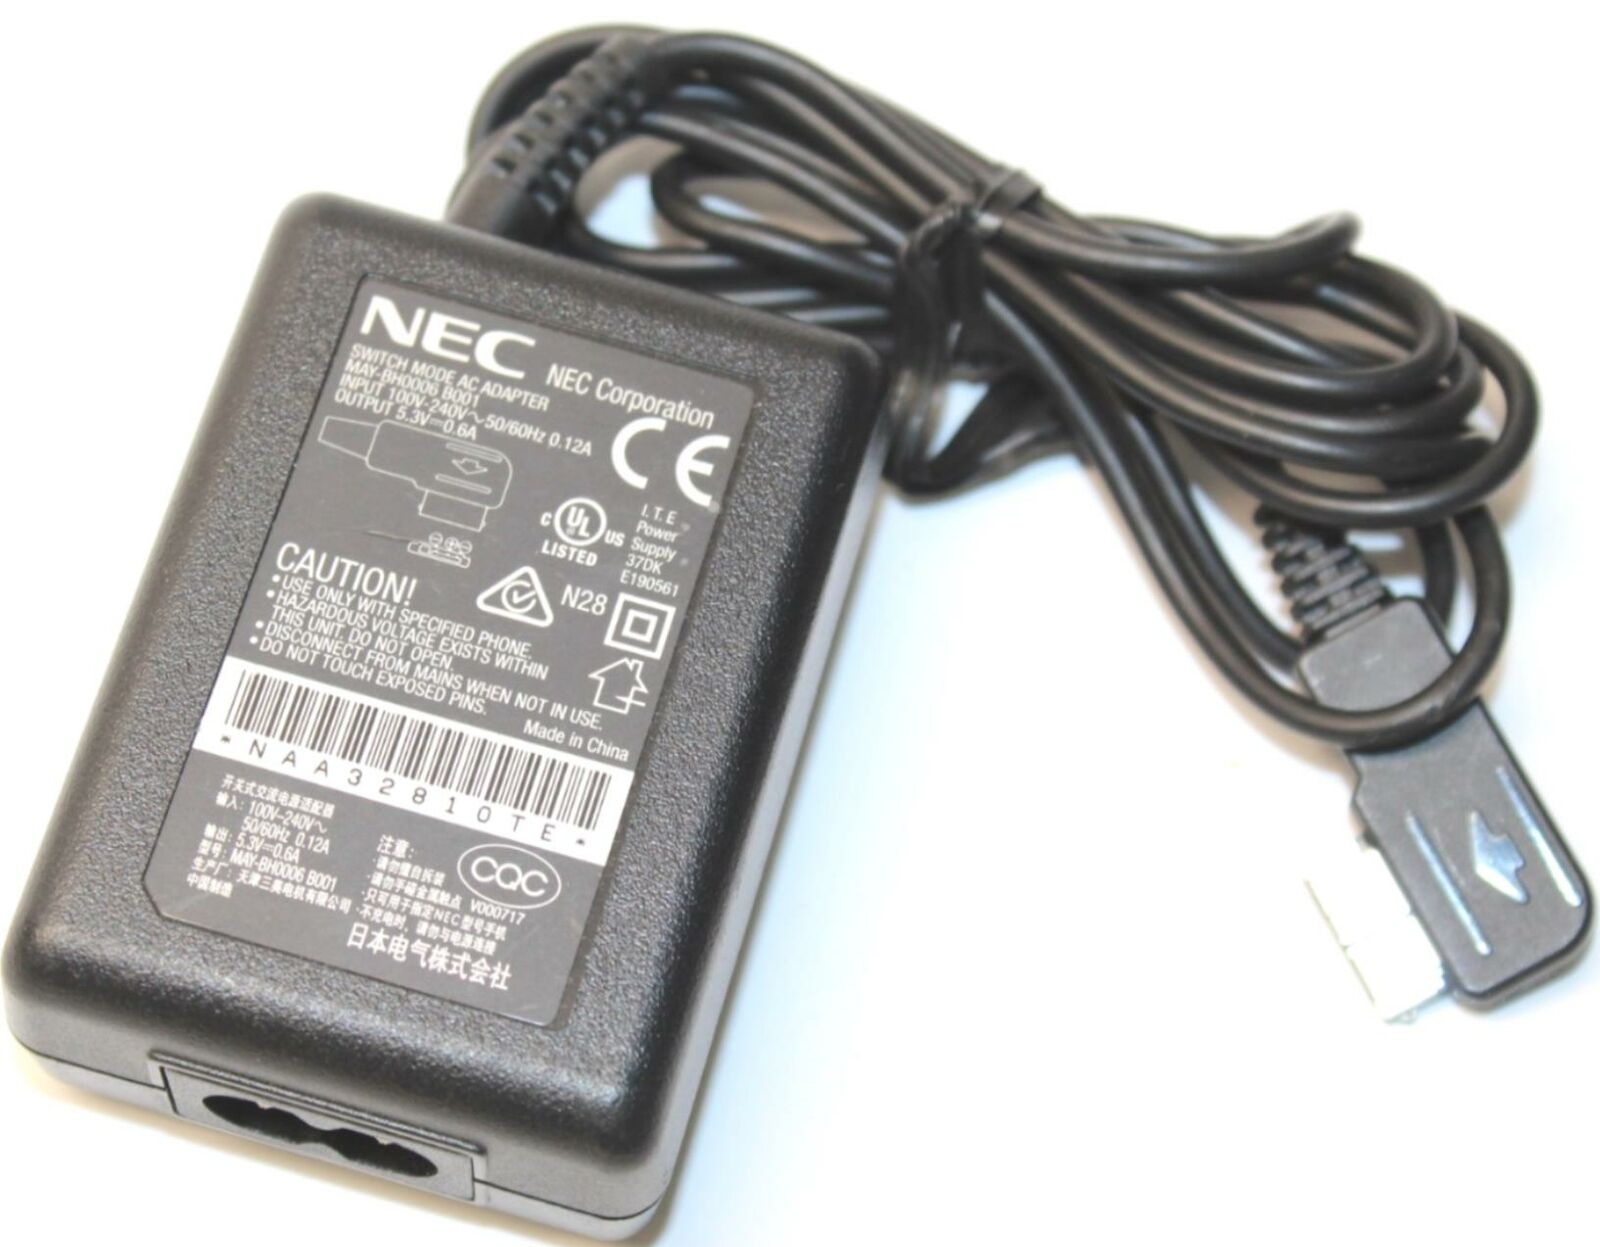 *Brand NEW* NEC 5.3V 0.6A AC ADAPTER MAY-BH0006 B001 Switch Mode Power Charger Adapter with POWER Supply